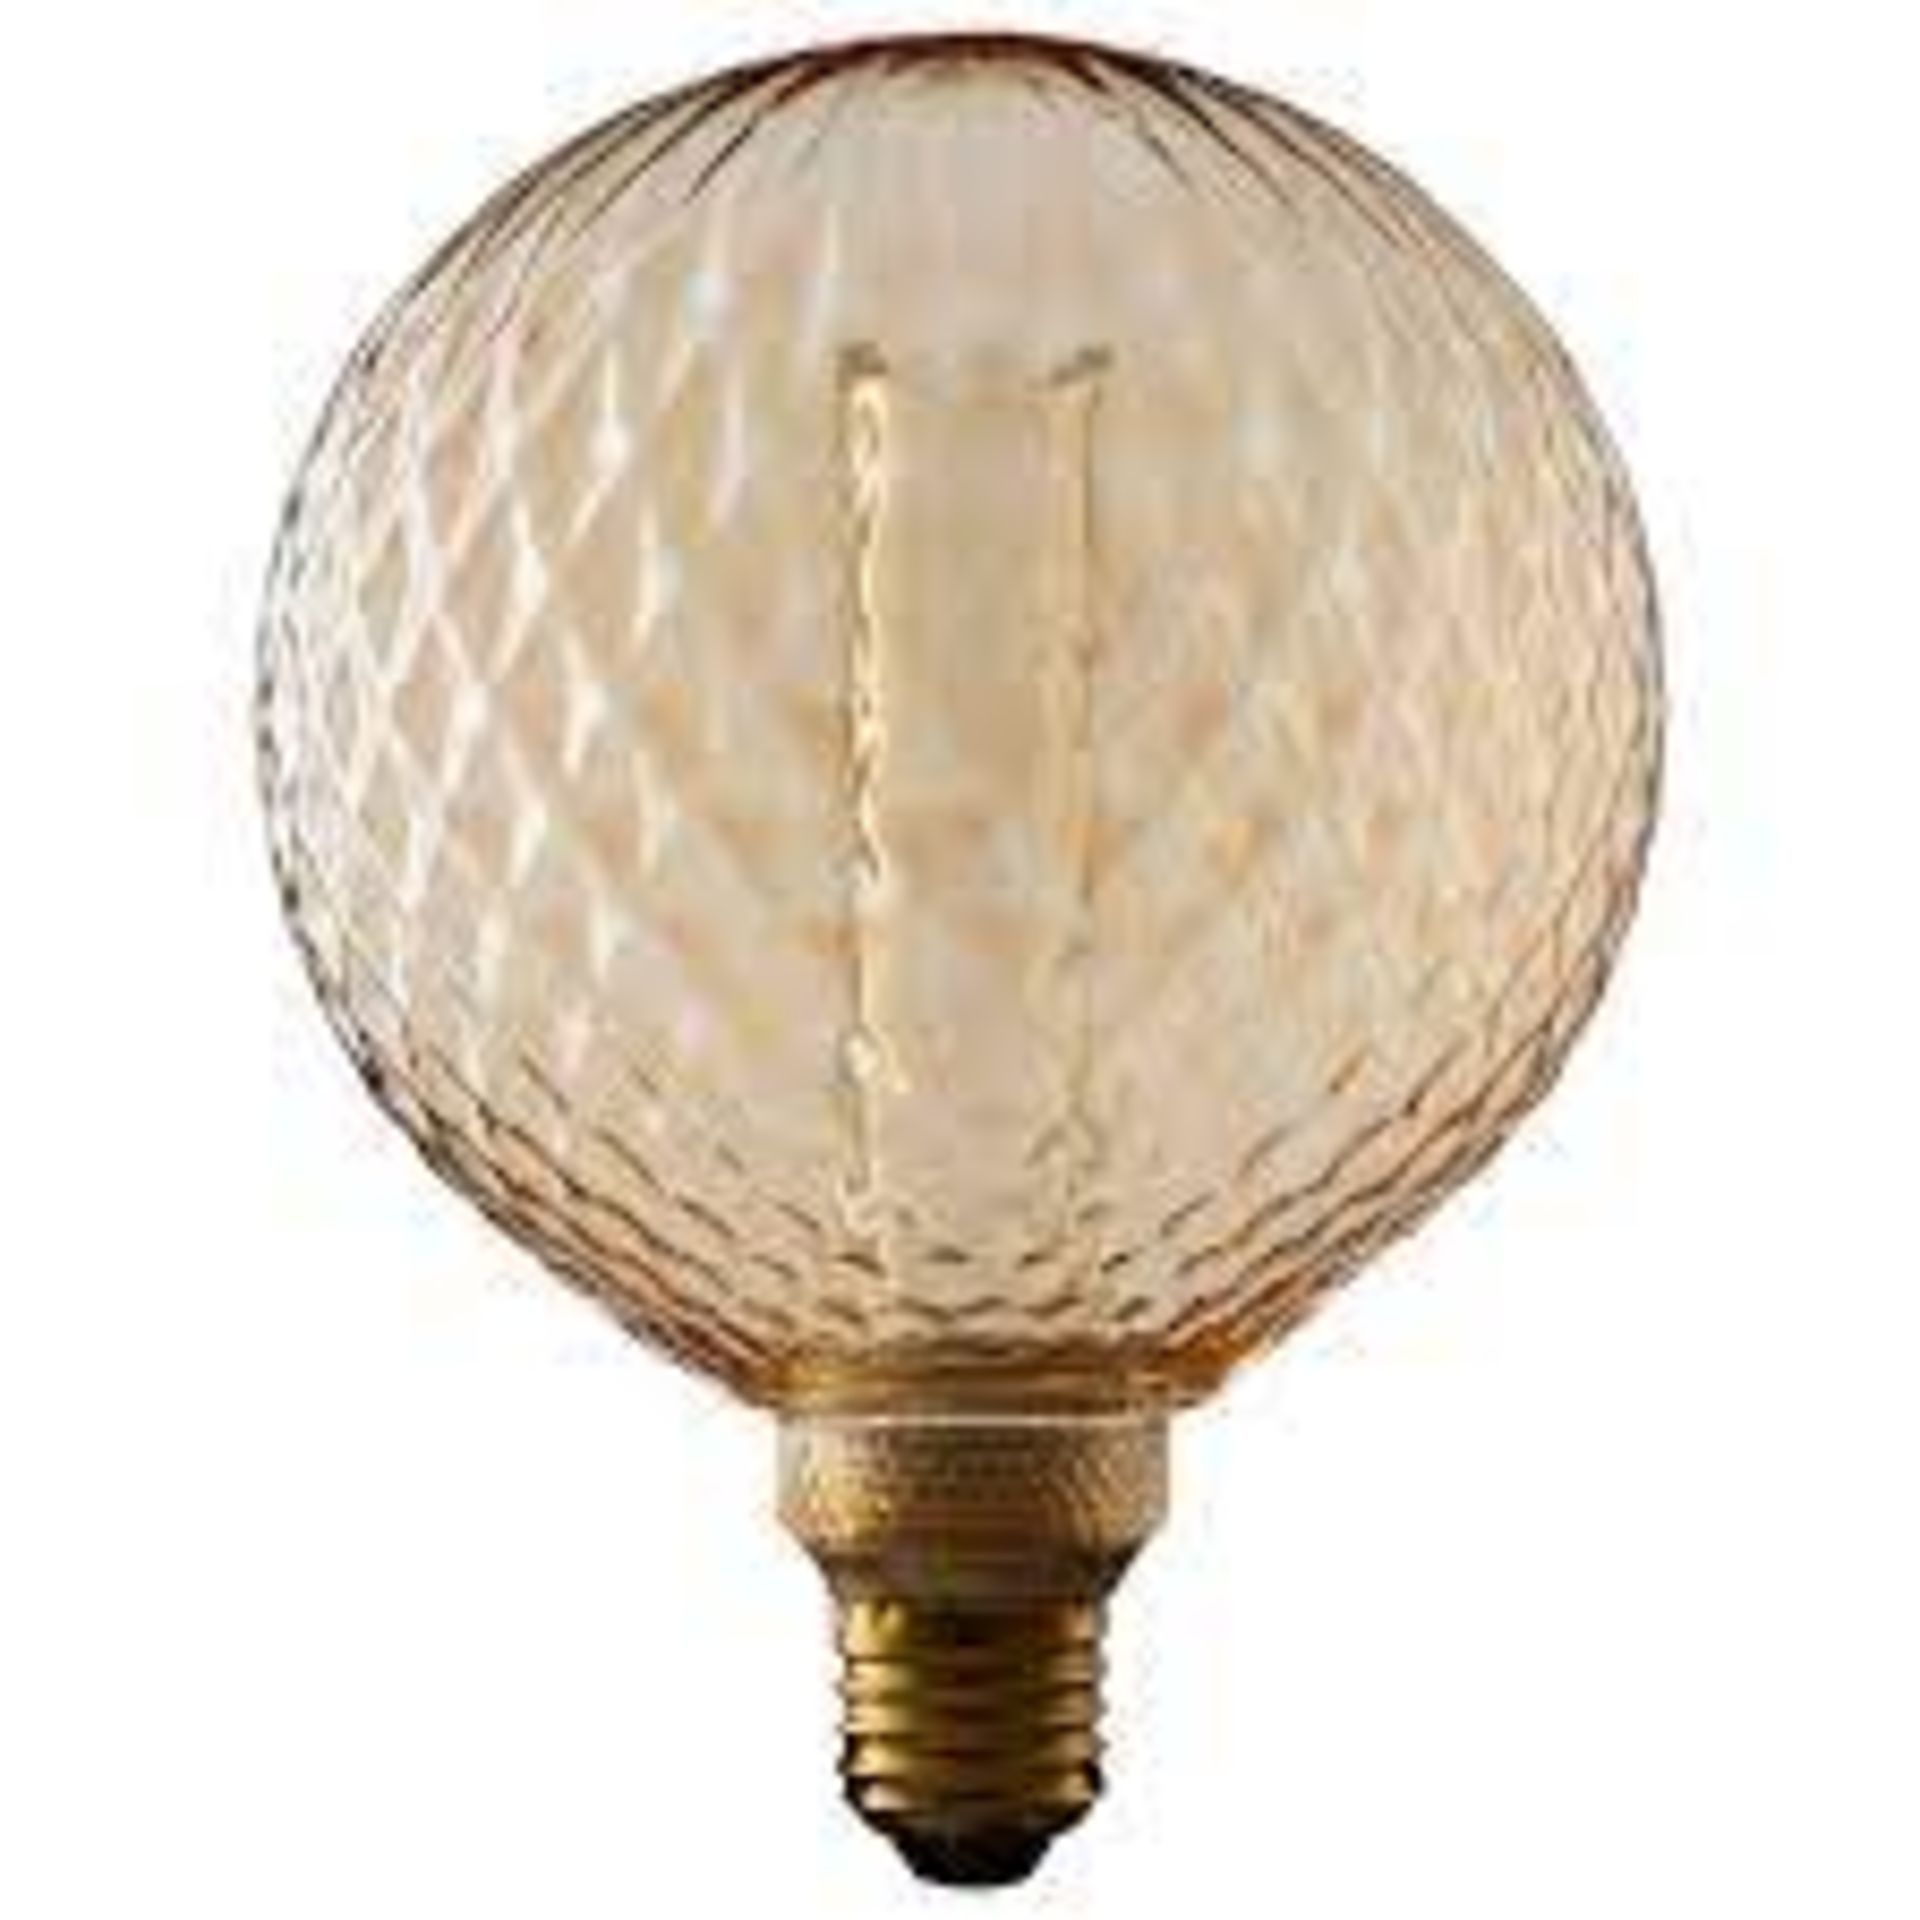 50 X BRAND NEW TCP VINTAGE LIGHTING RIBBED GLOBE WITH AMBER GLASS AND A WARM WHITE GLOW 120LM 2.5W - Image 2 of 3